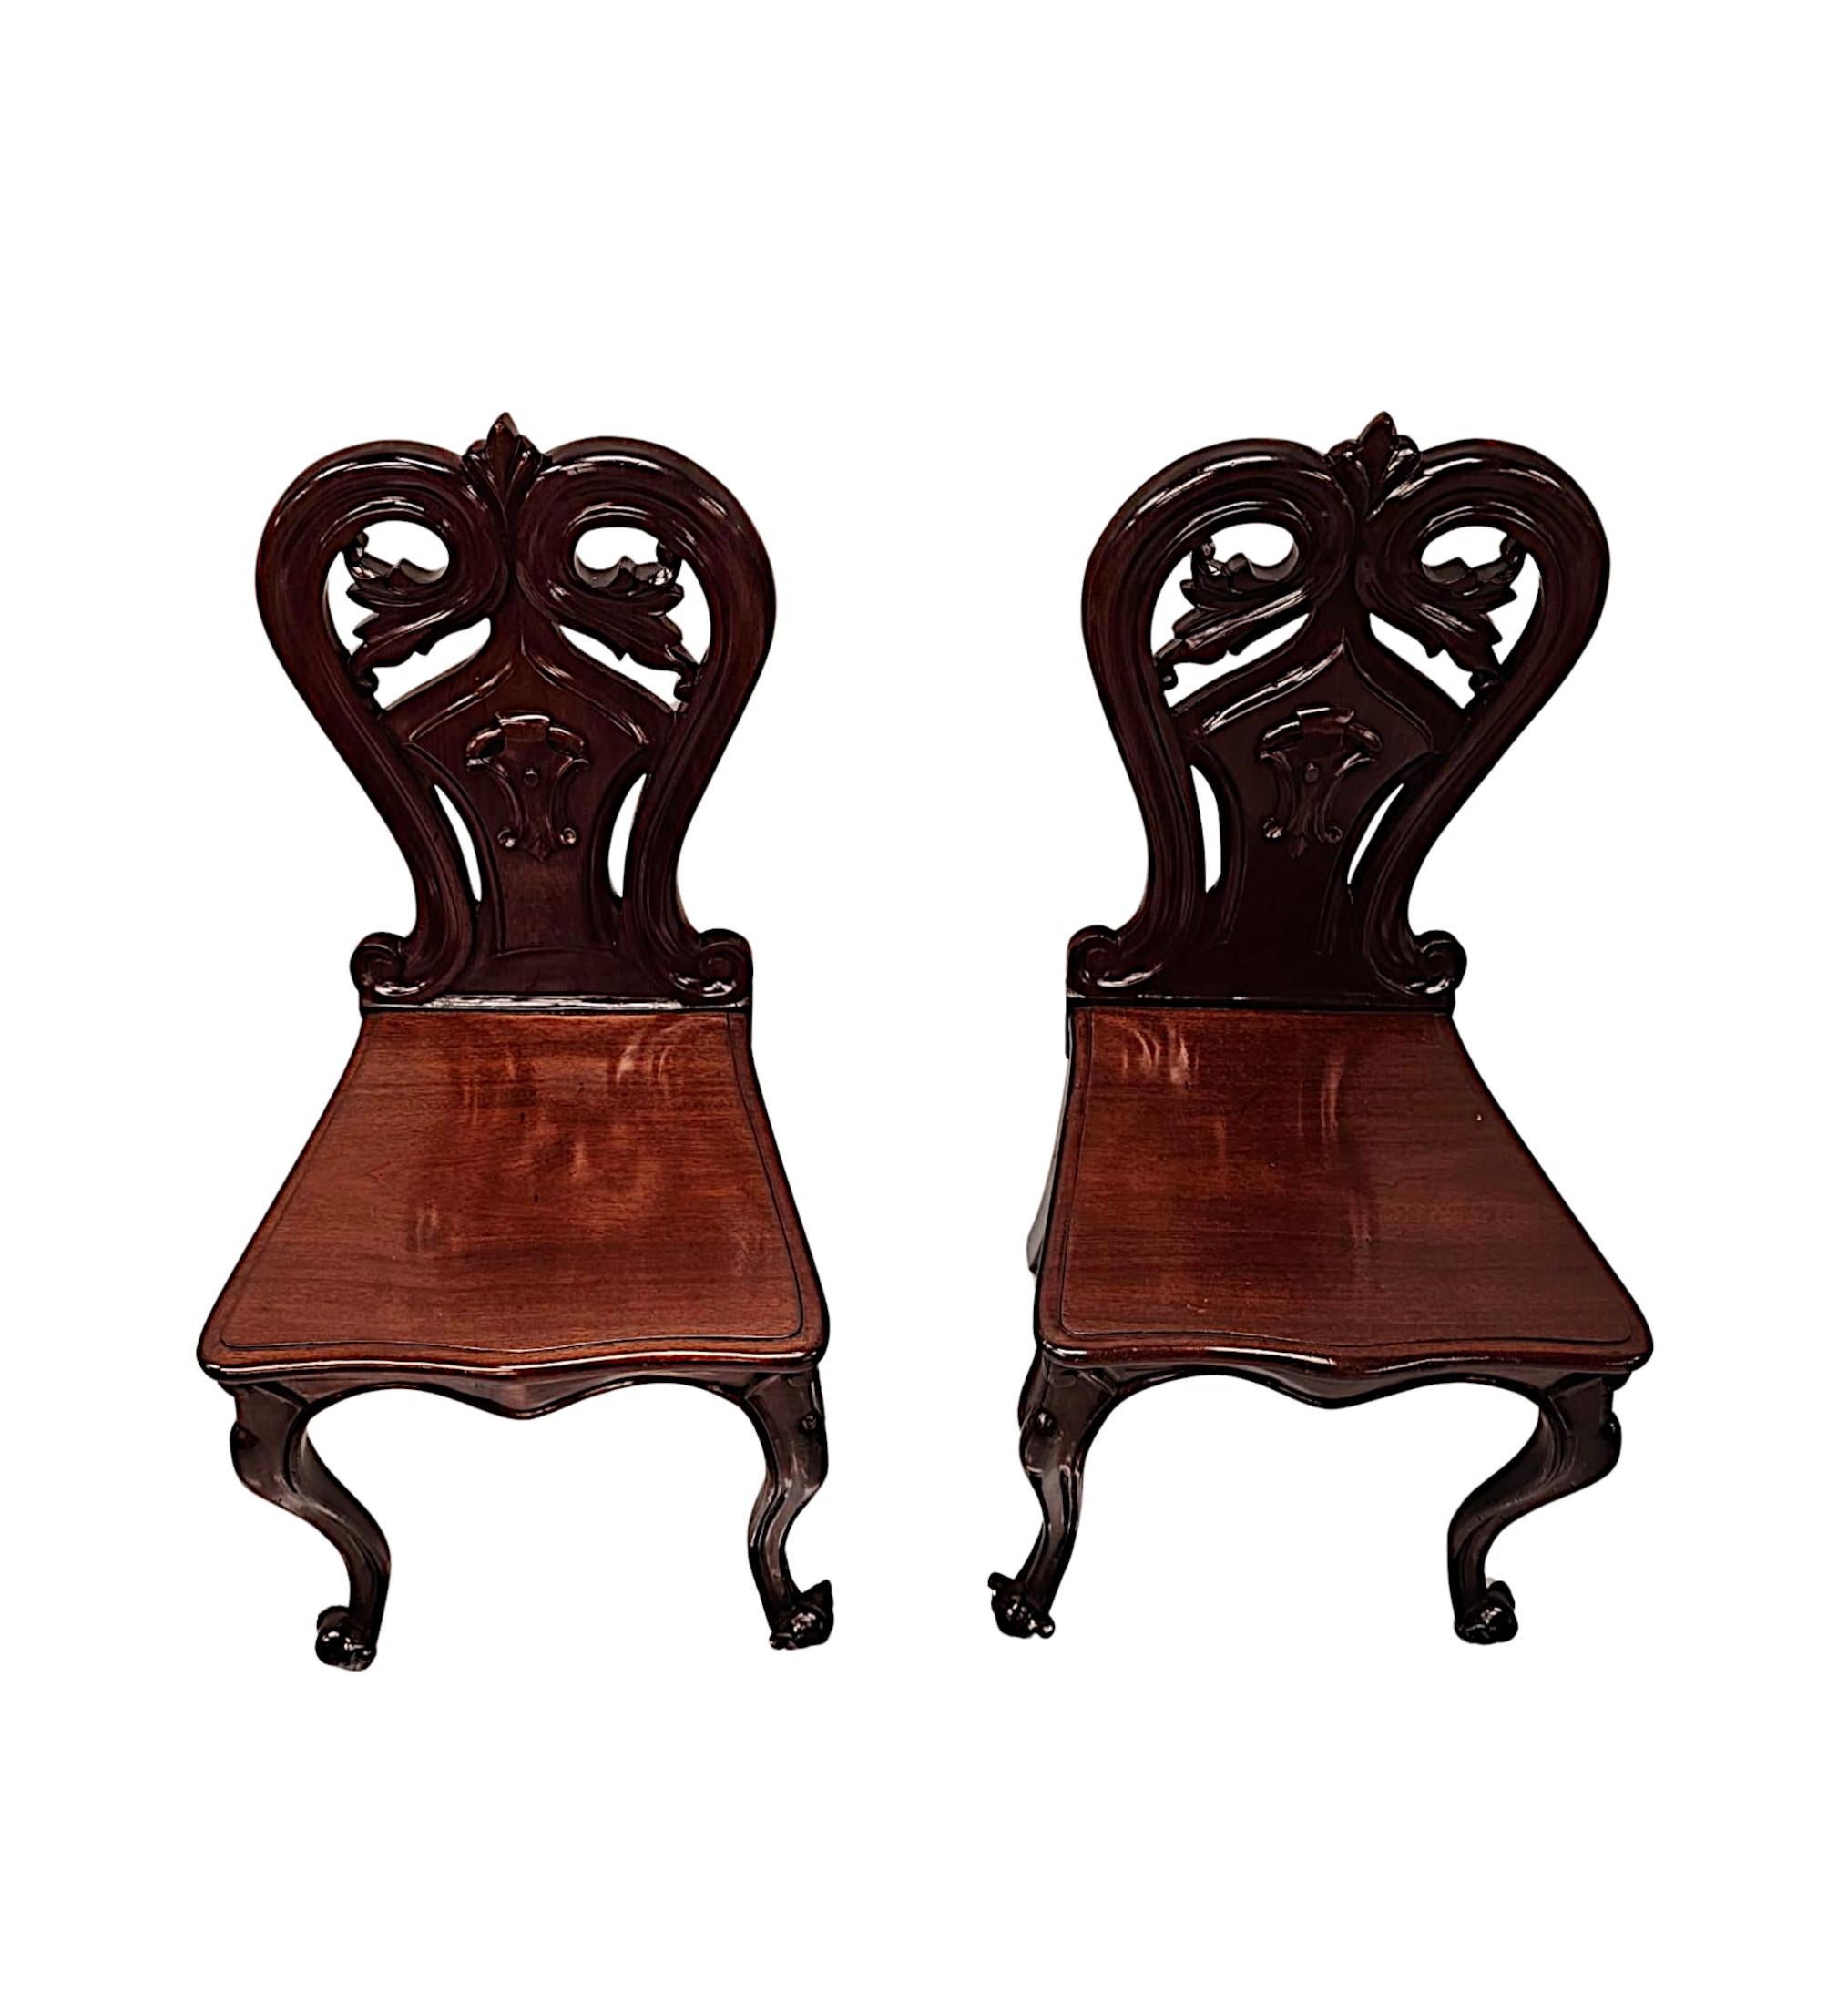 English A Stunning Pair of 19th Century Hall Chairs For Sale